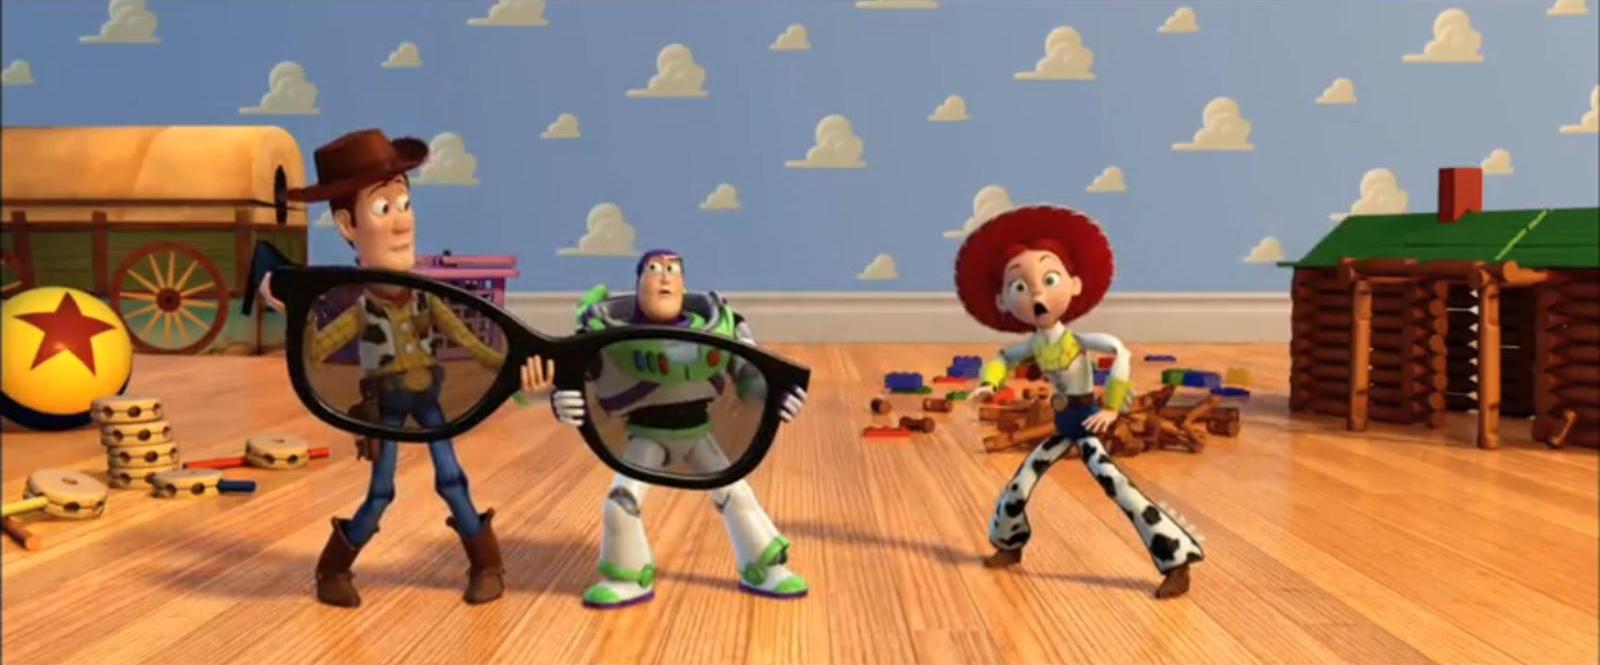 toy story 2 animation style 